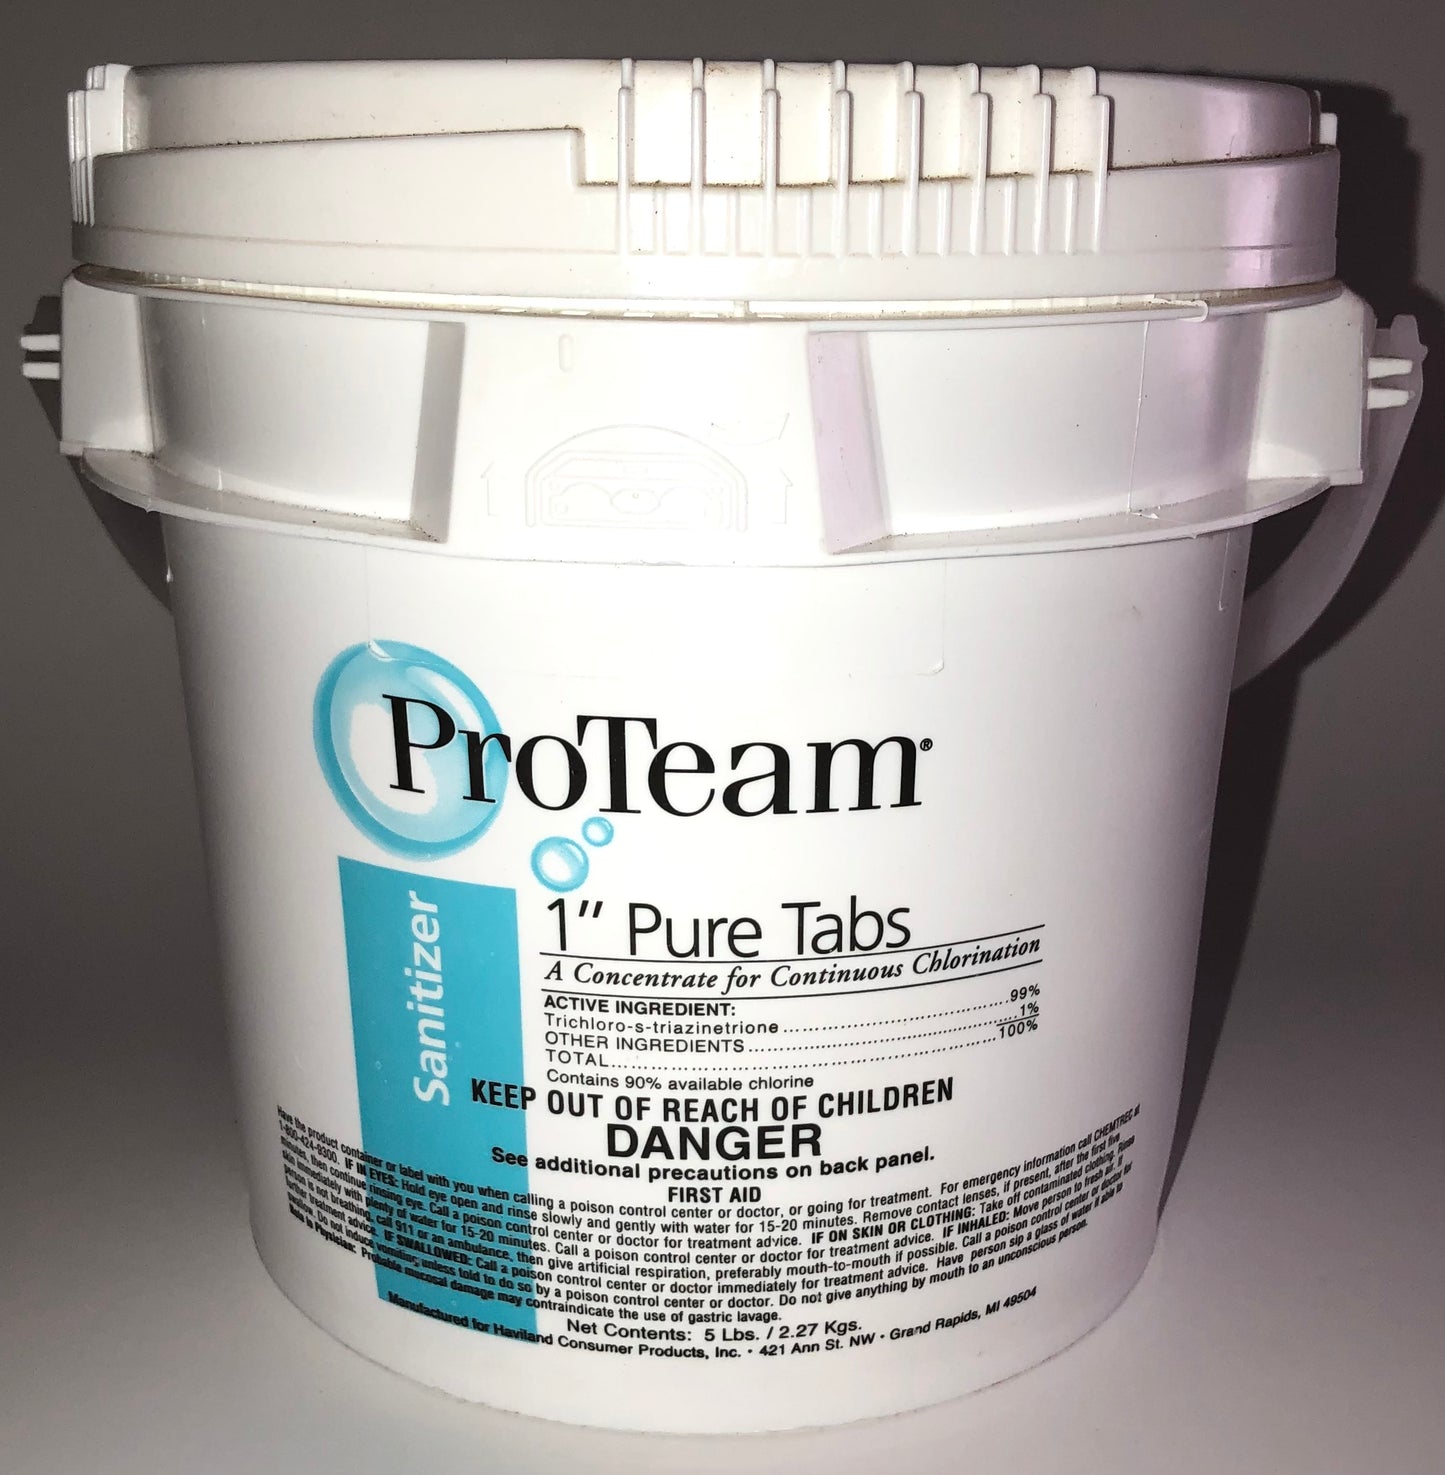 ProTeam 1” Pure Tabs - 5 pounds